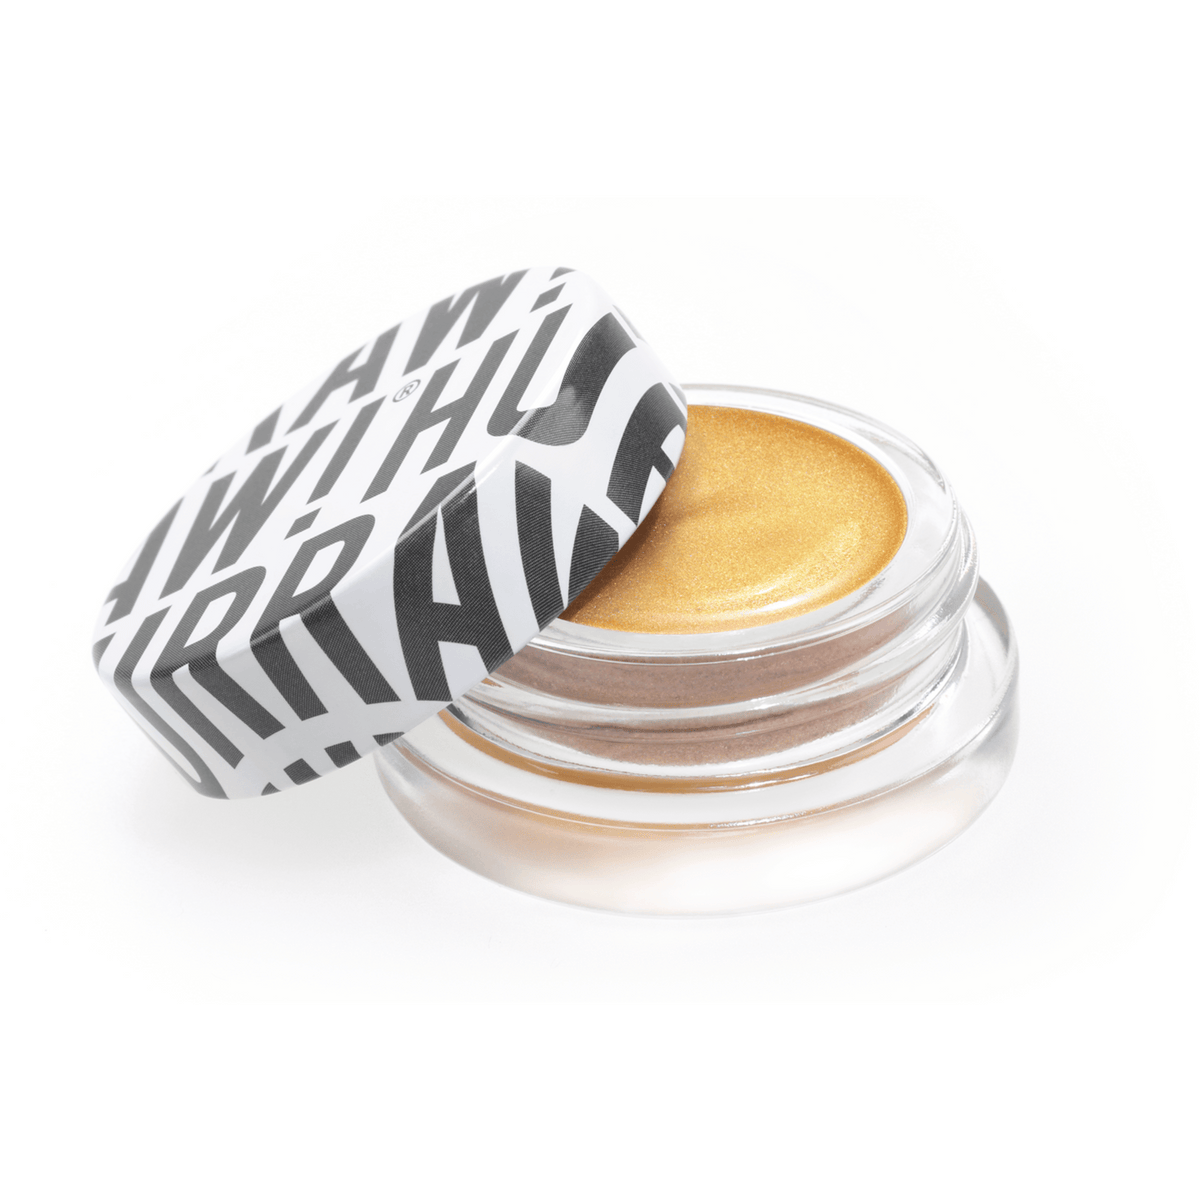 Primary Image of Gold Aura Balm